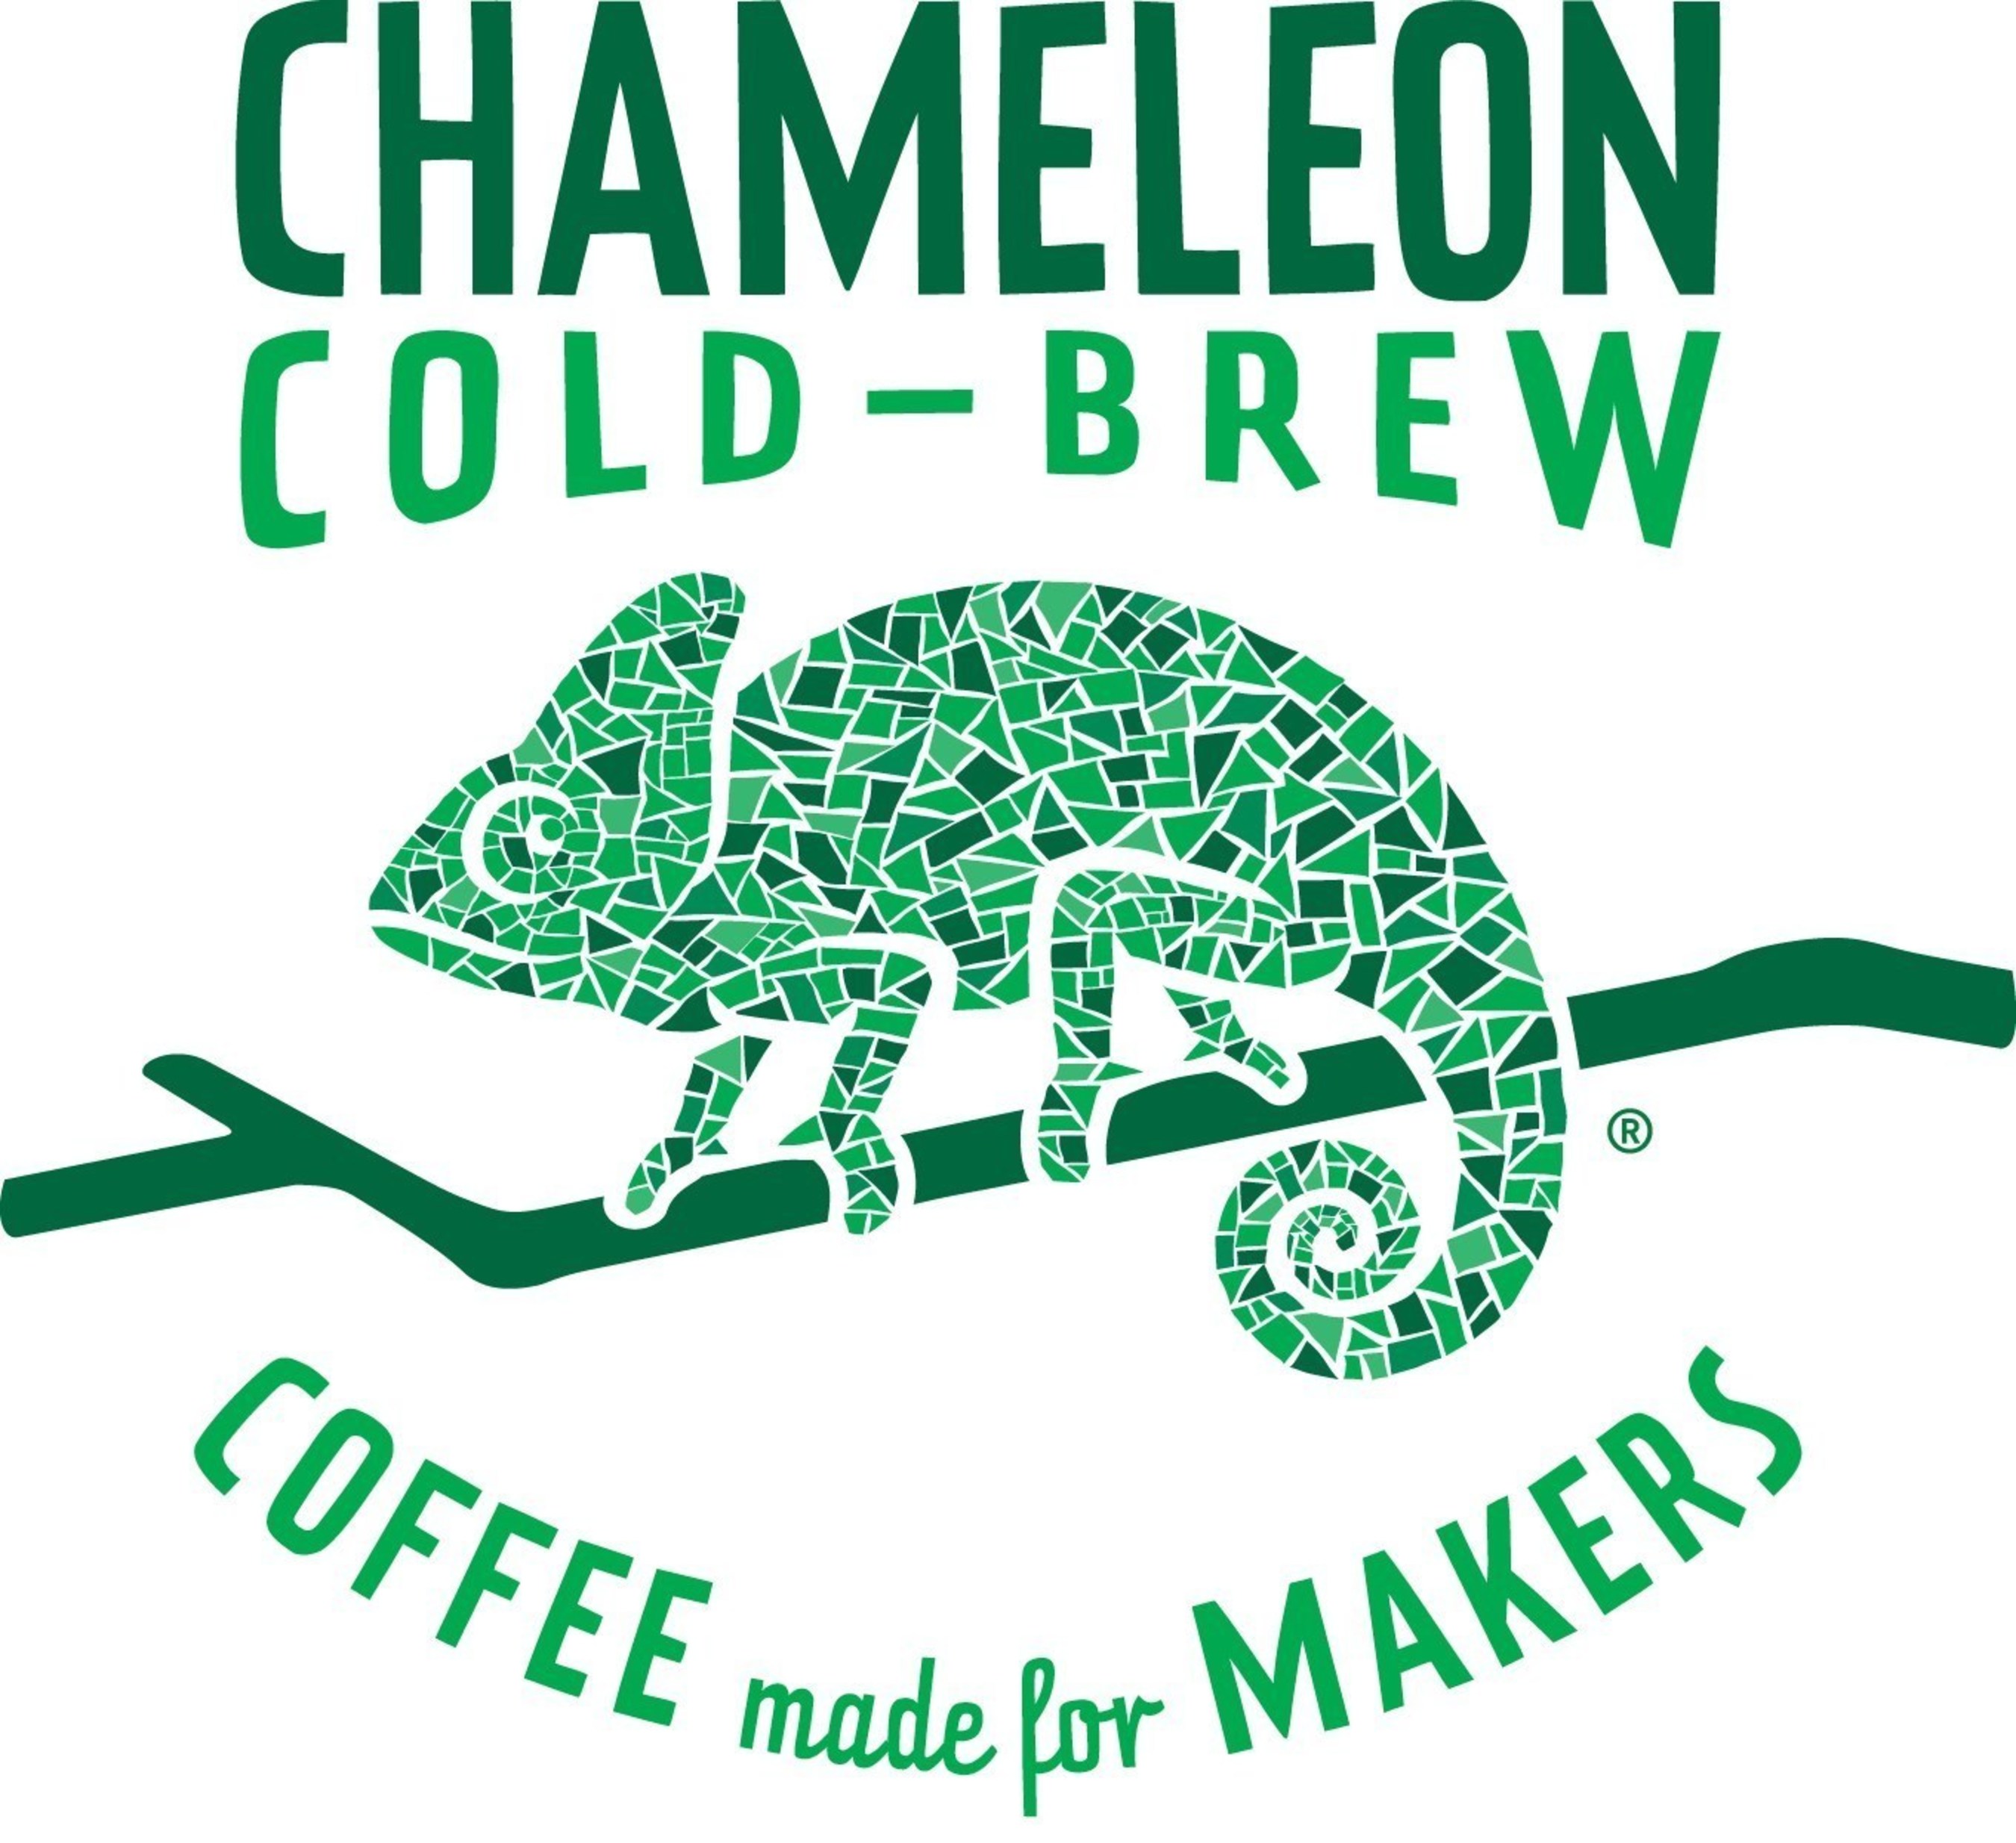 Chameleon Cold-Brew Lands Top Spot on the 2016 Inc. 5000 List Ahead of Any Other Bottled Coffee Brand